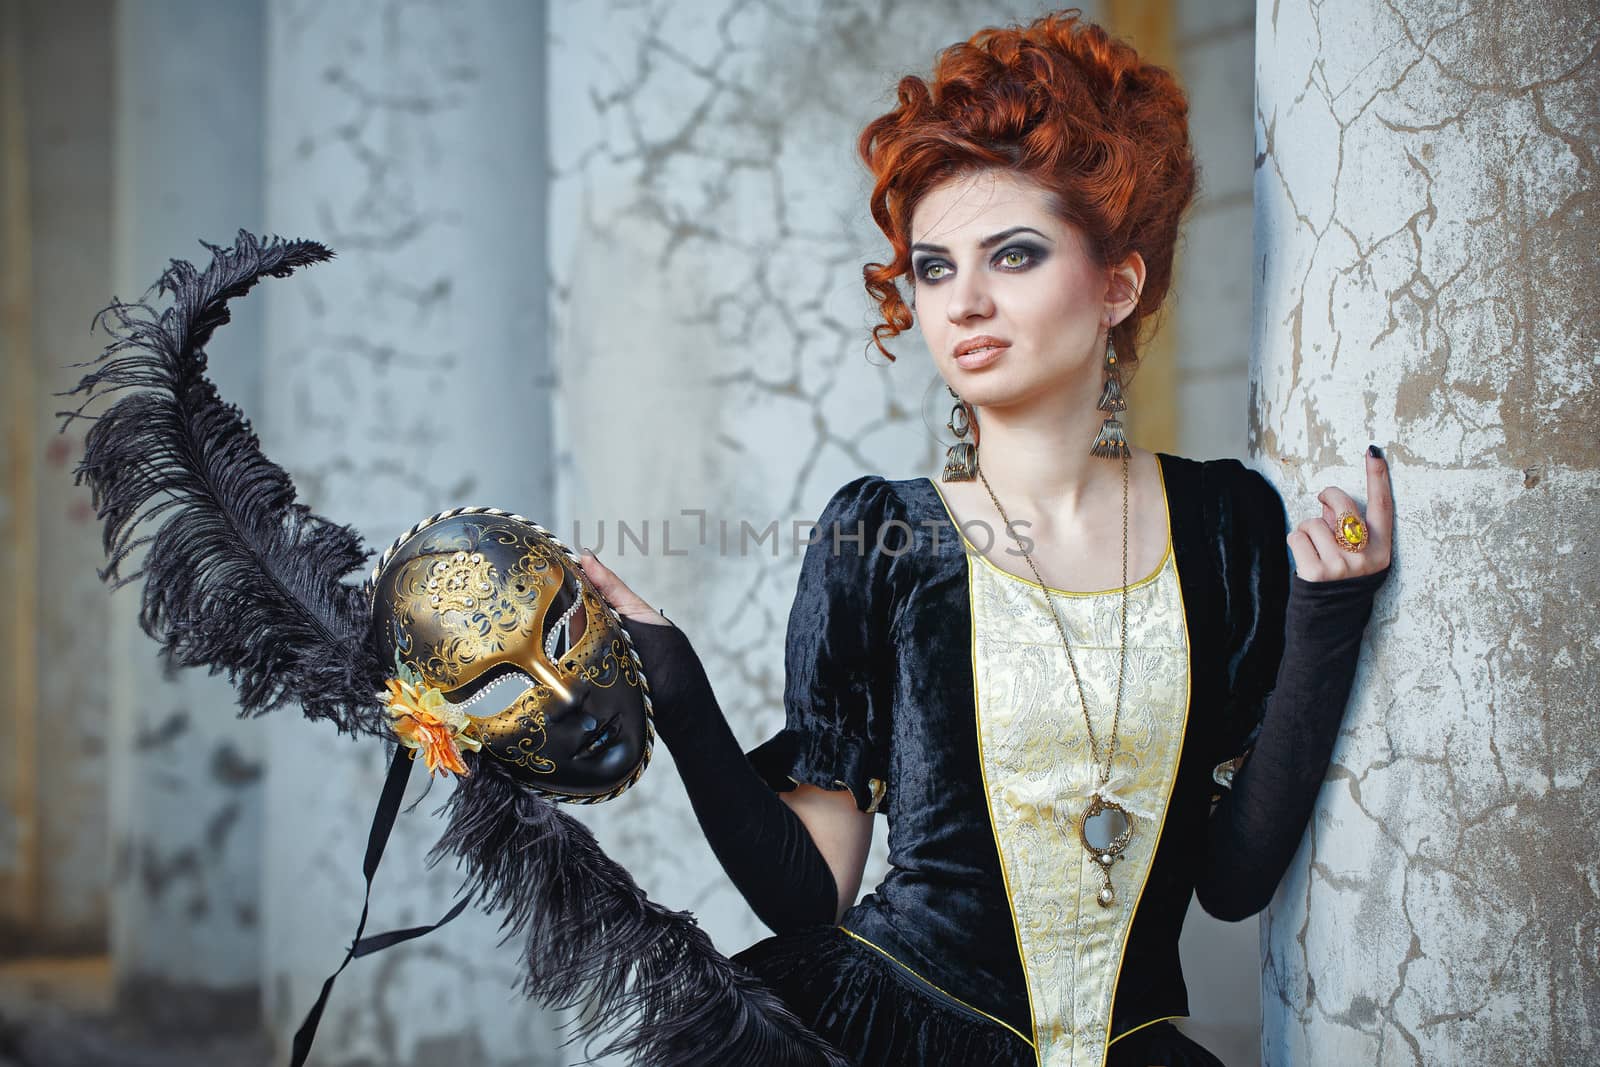 Close-up portrait of red-haired woman holding a mask shot against the background of columns